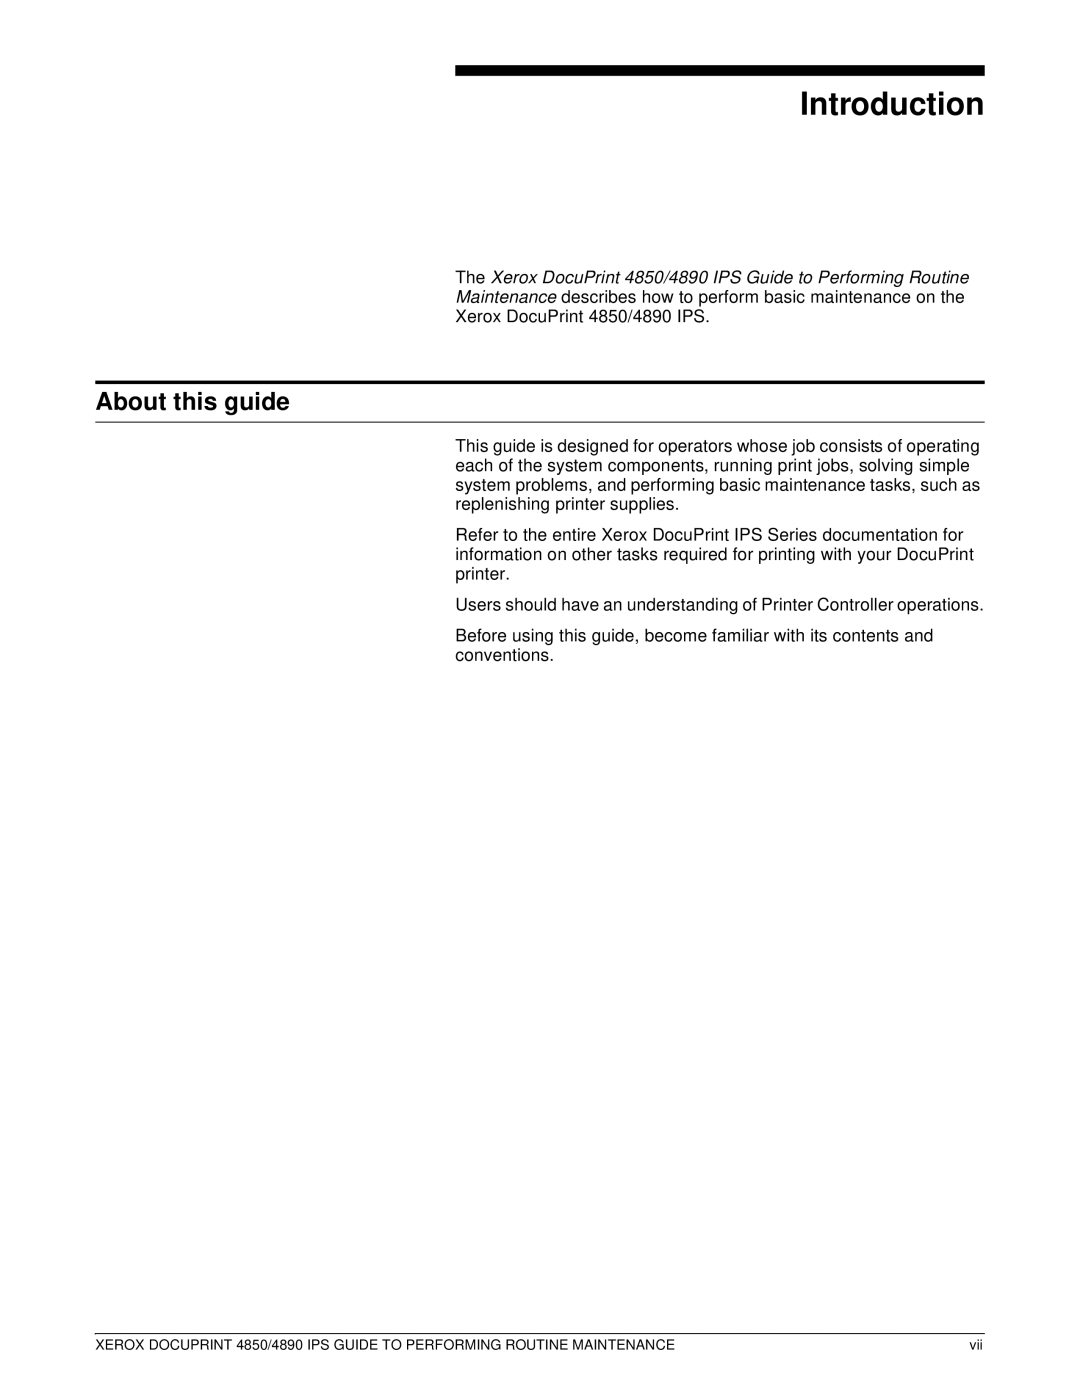 Xerox 4890 IPS manual Introduction, About this guide 